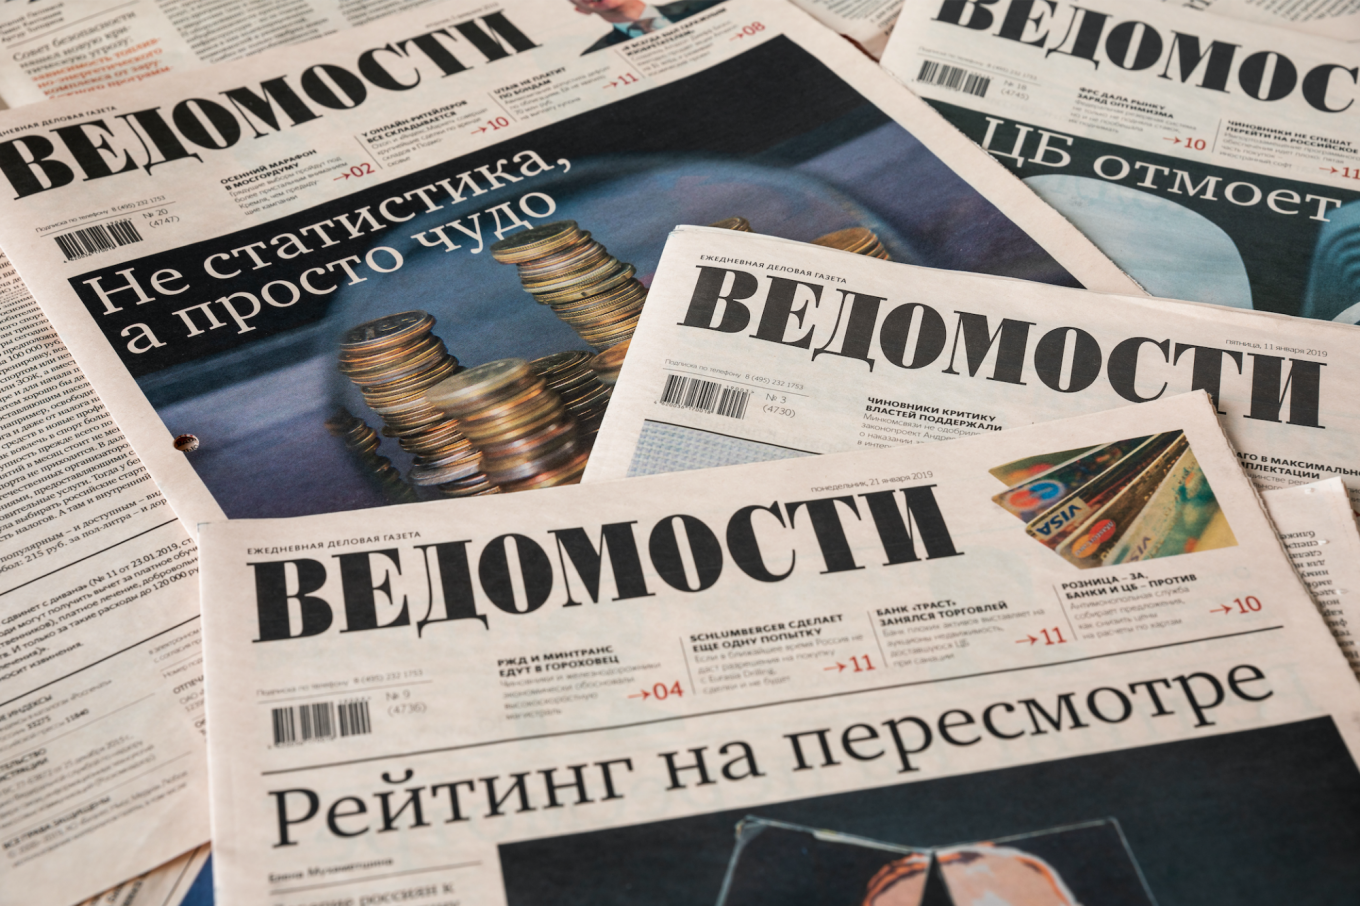 Staff at Top Russian Paper Offer Replacement for Controversial Editor